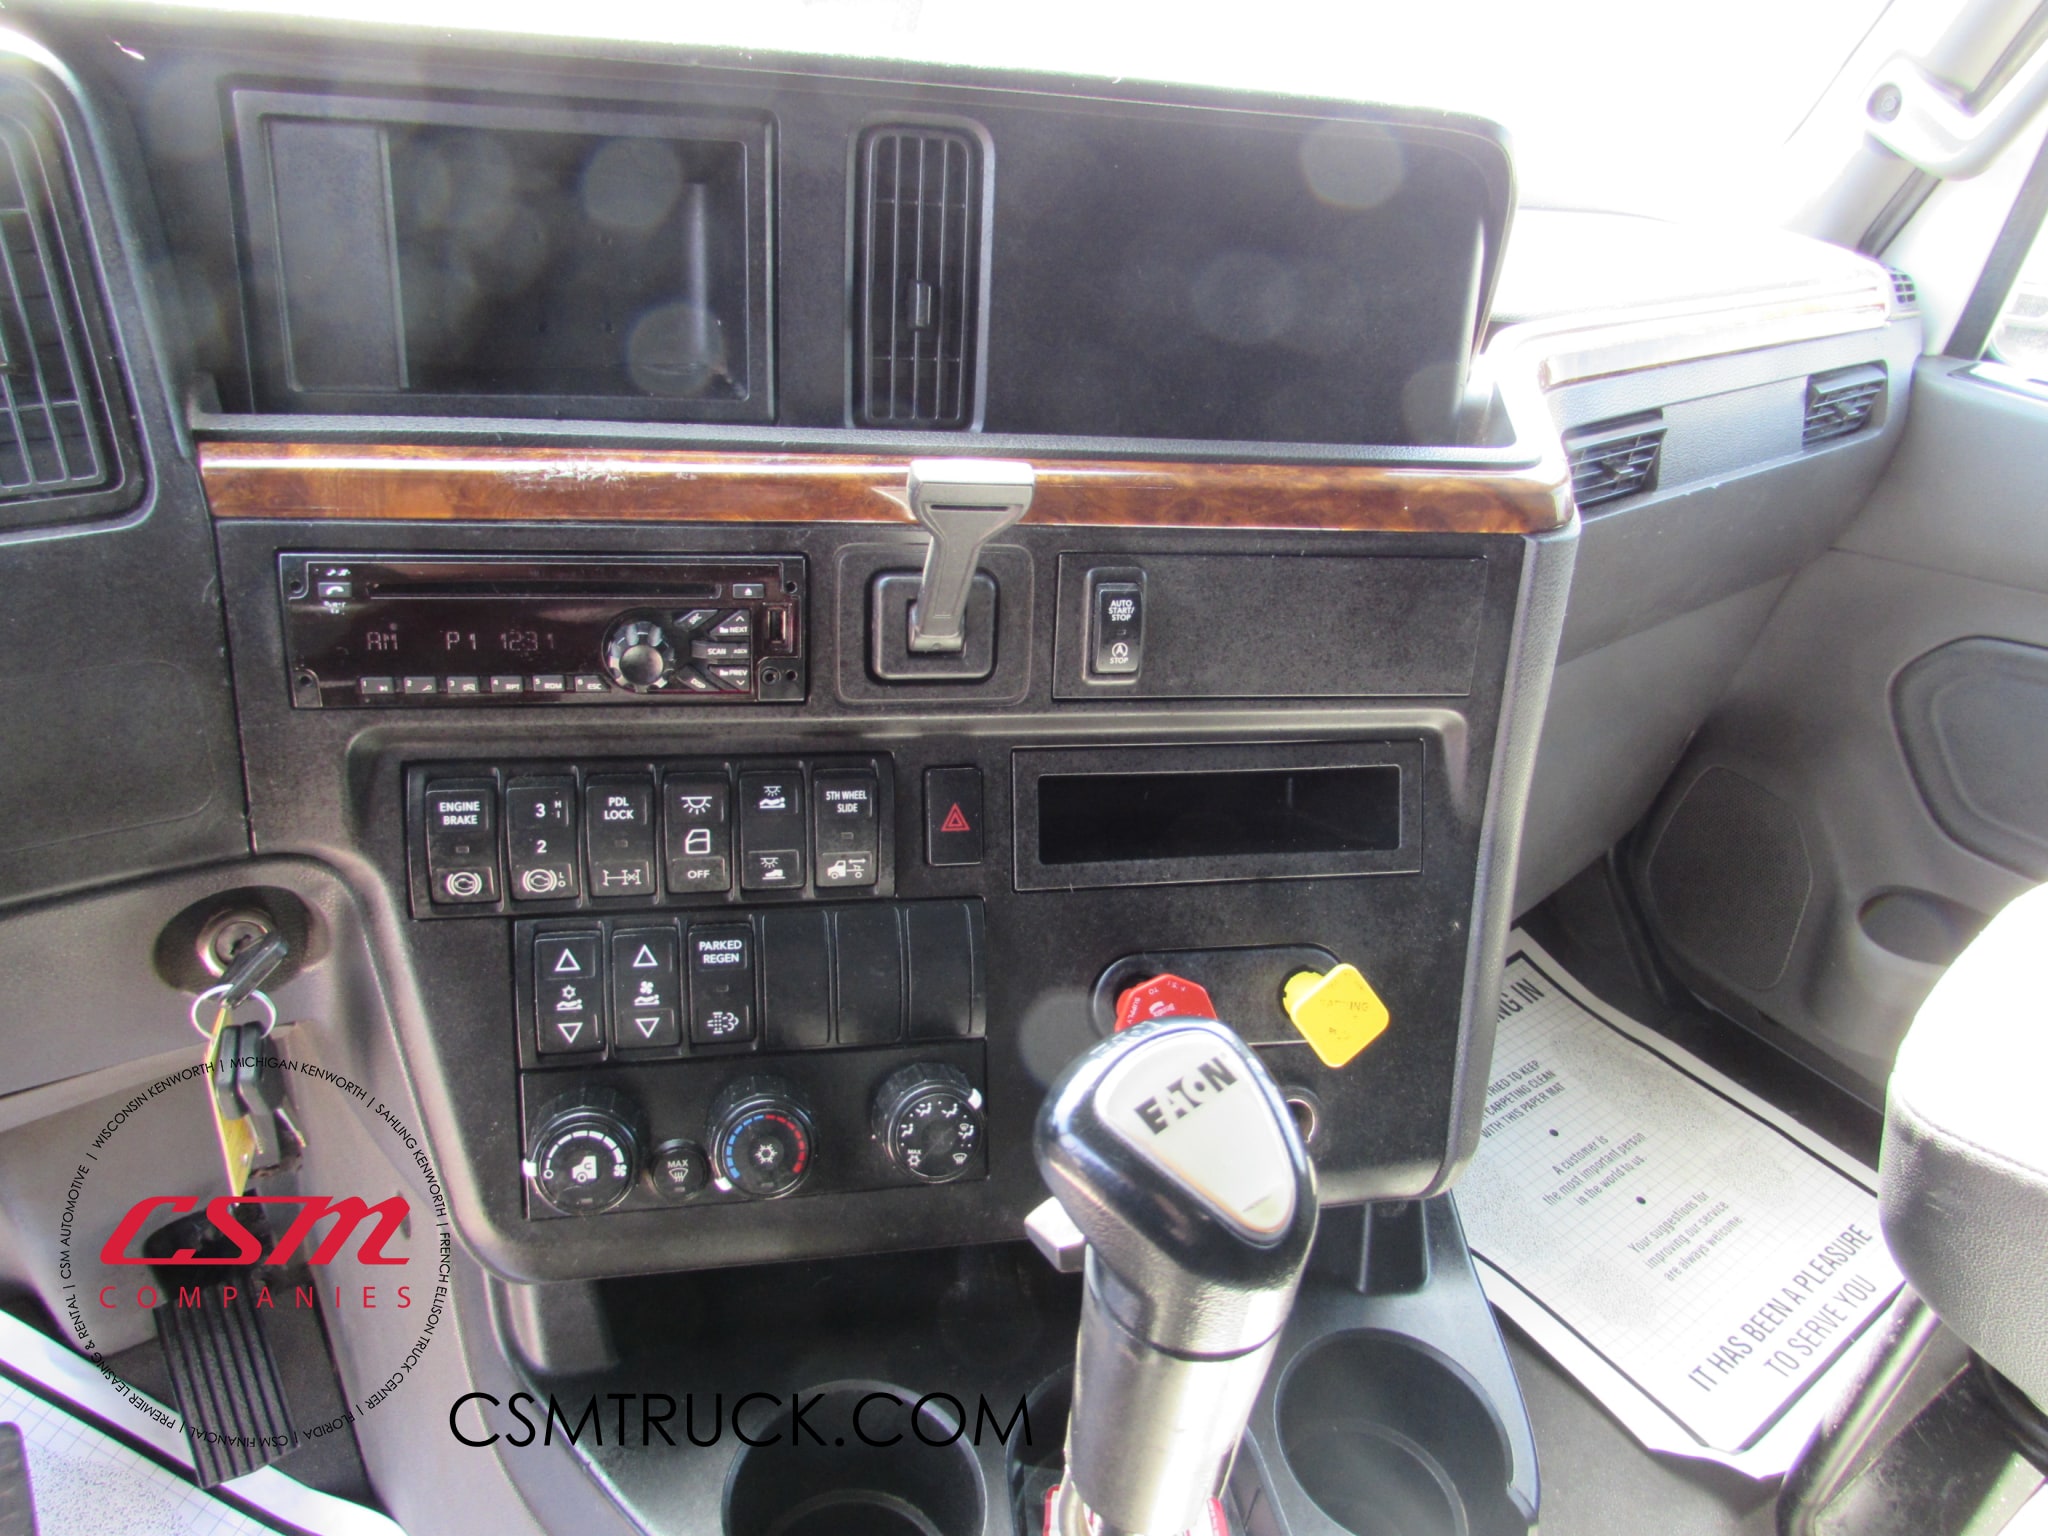 Interior radio and navigation system for this 2018 International LT Series (Stock number: UJN500506)